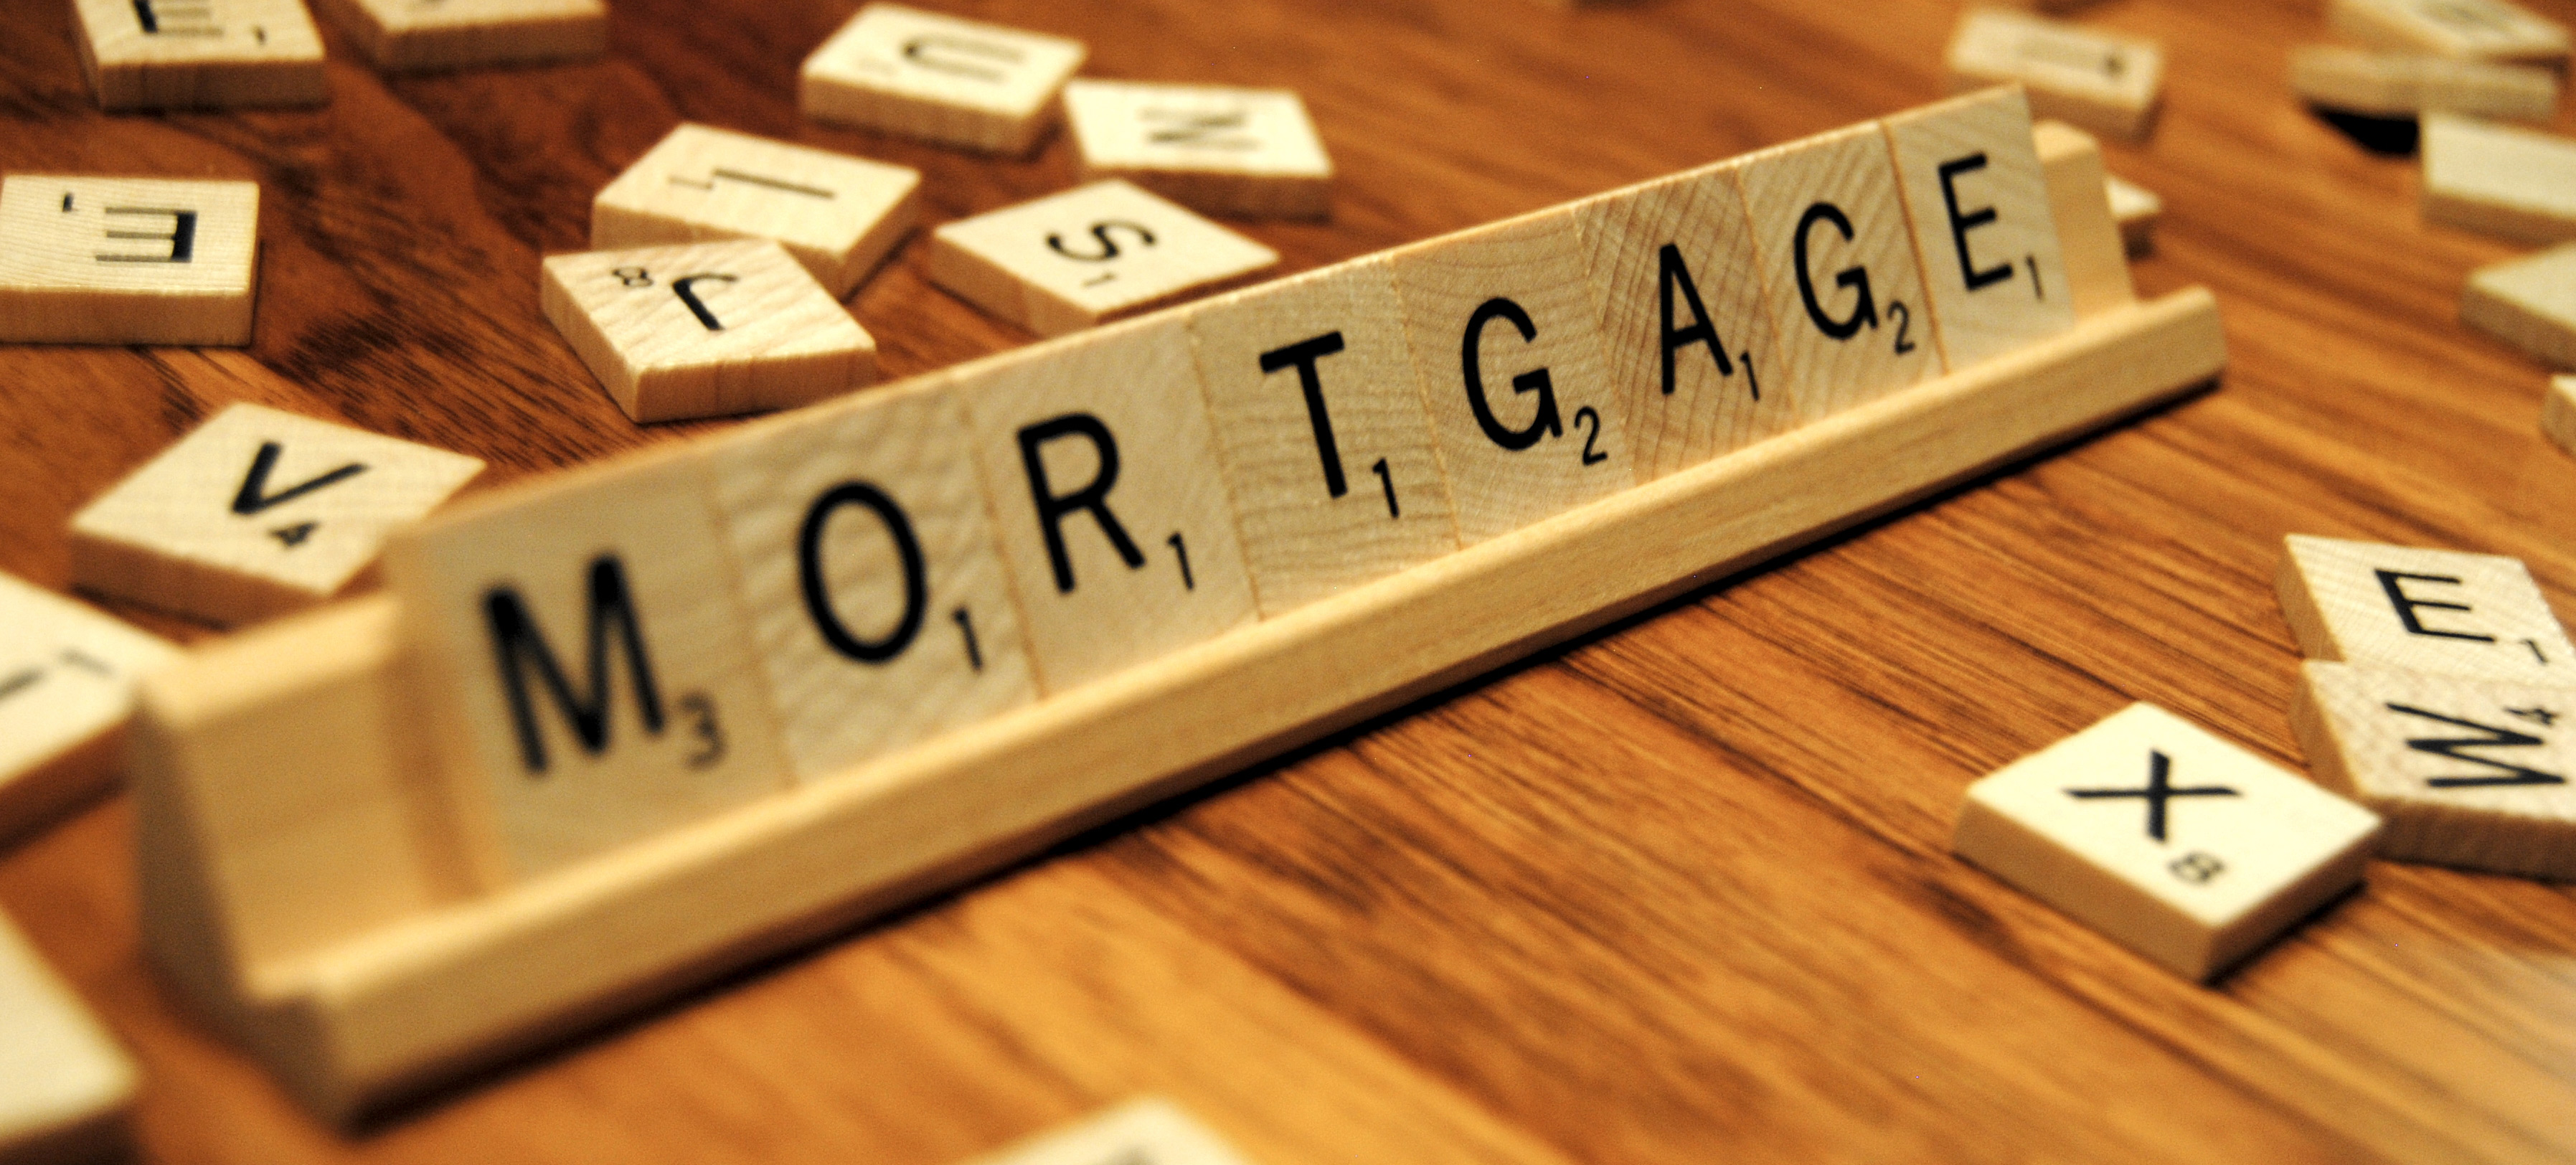 monopoly mortgage rules